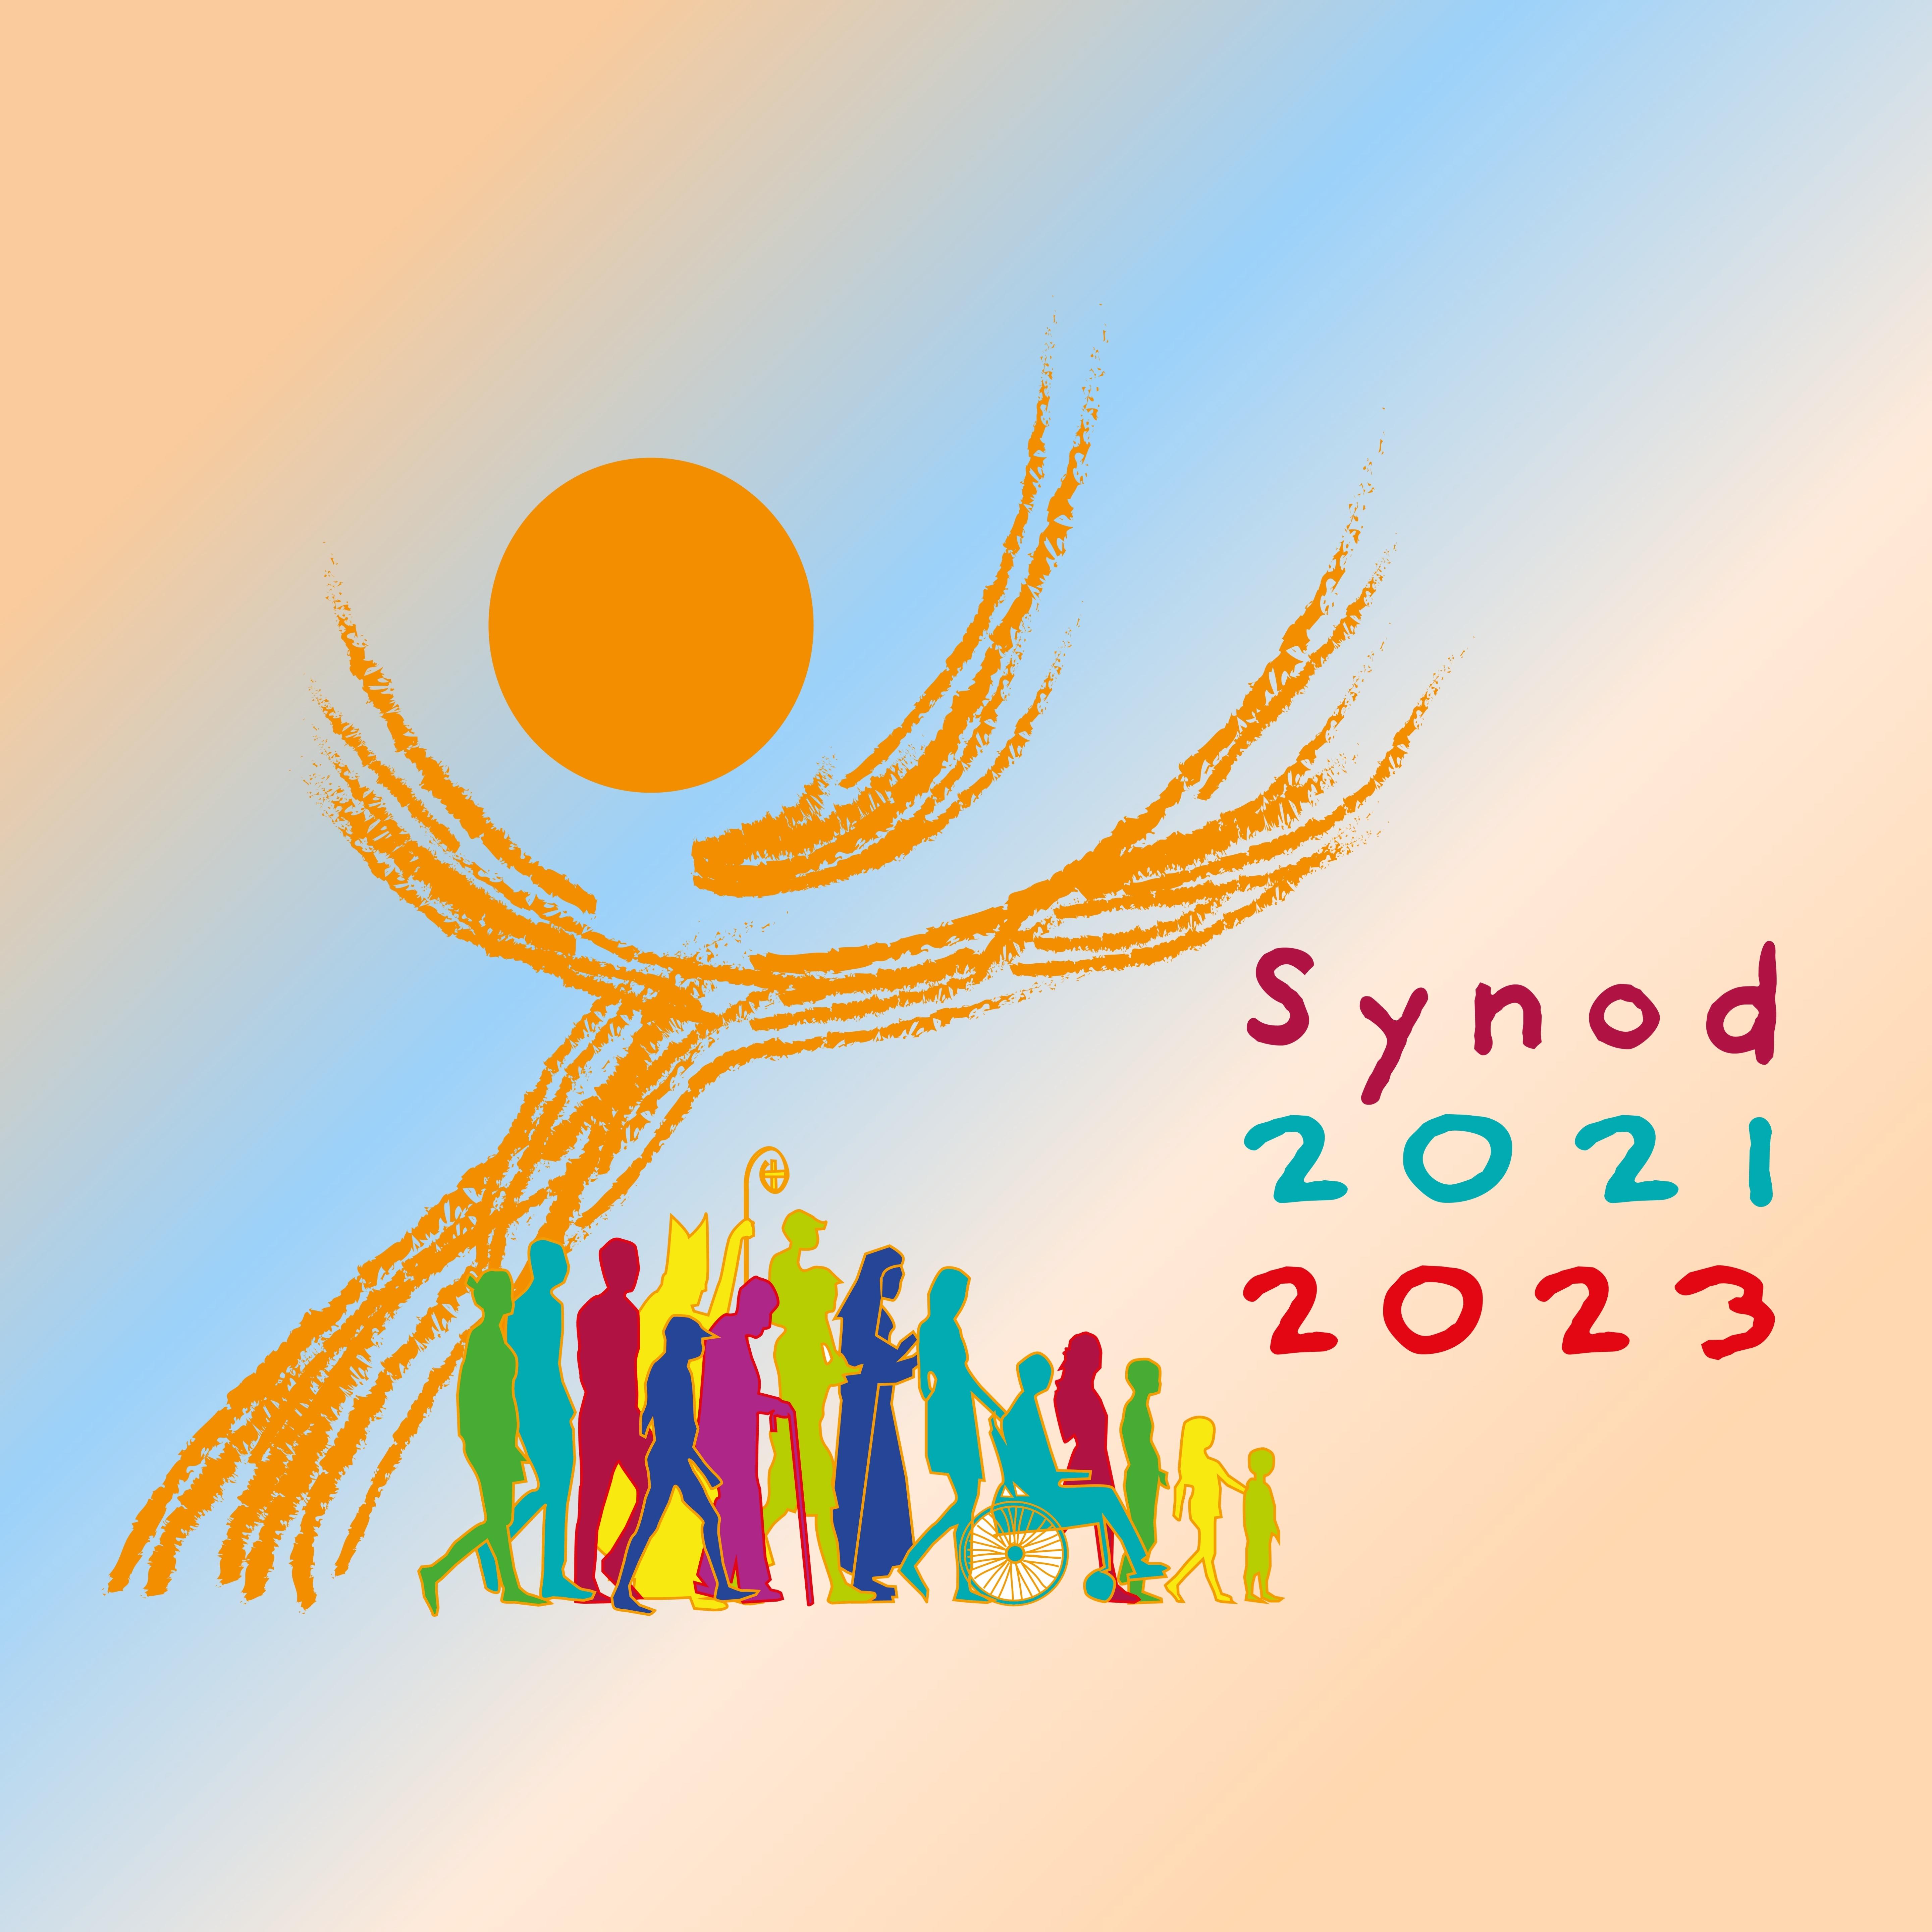 220120 synod community participation and mission 1920 1920 px